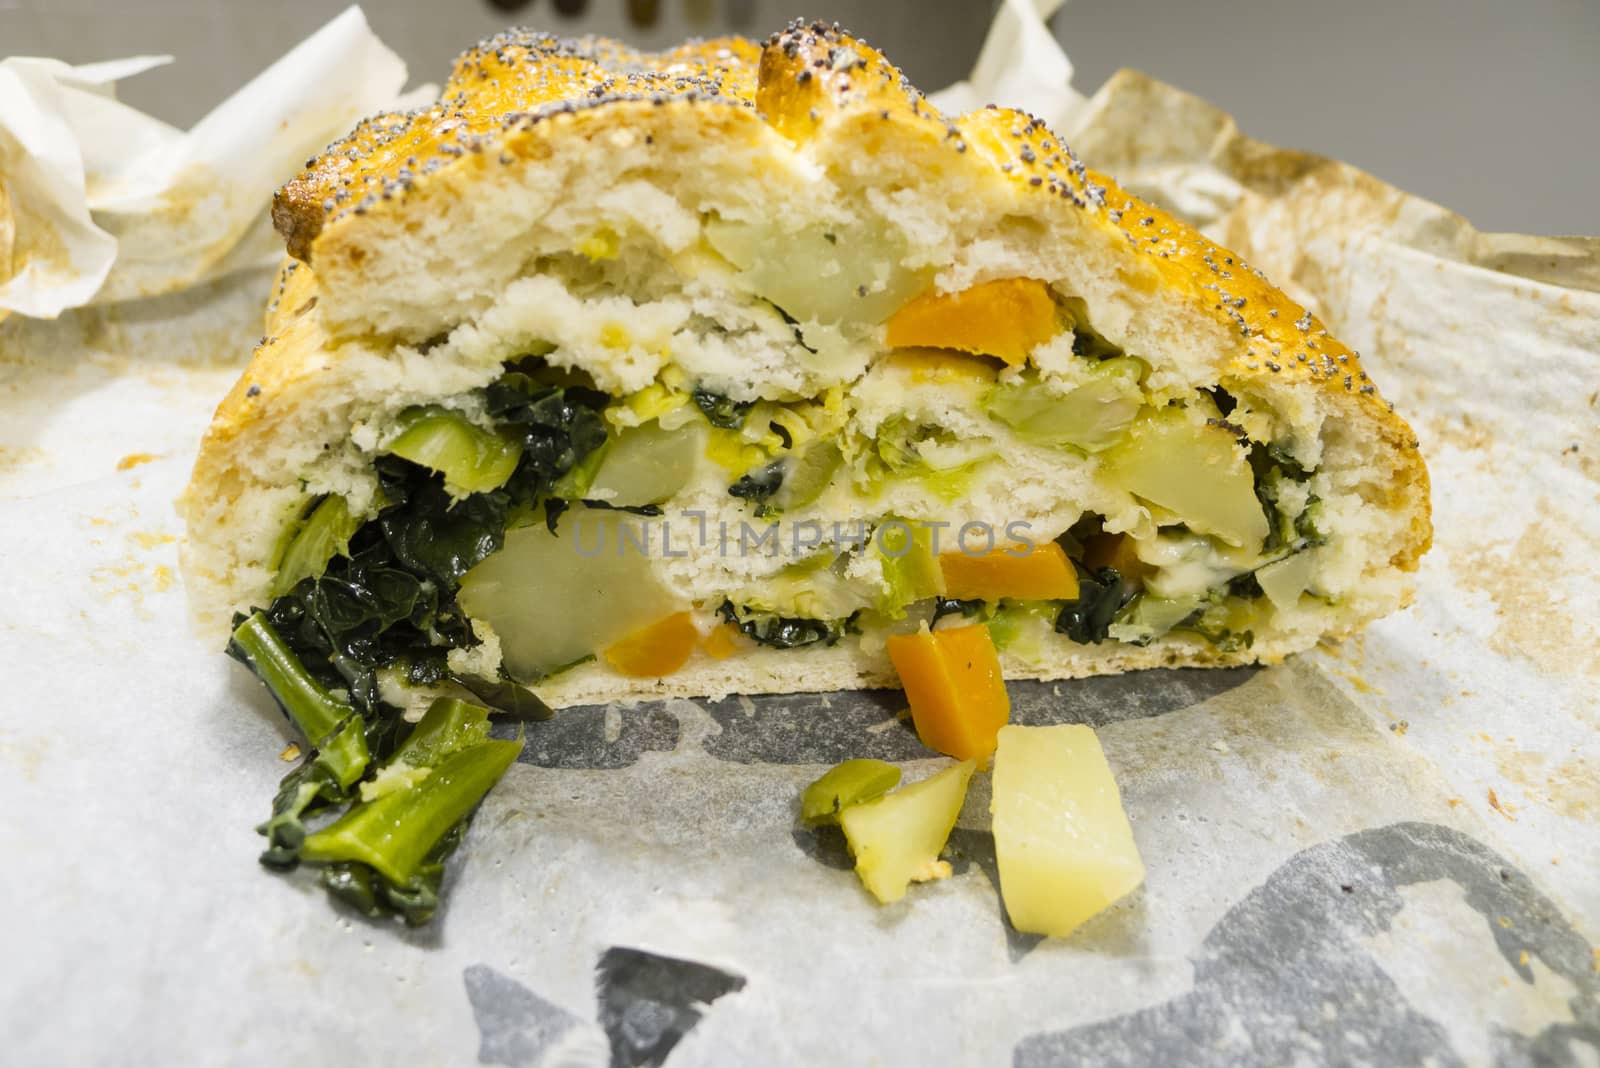 homemade baked vegetable bread loaf by AlessandroZocc